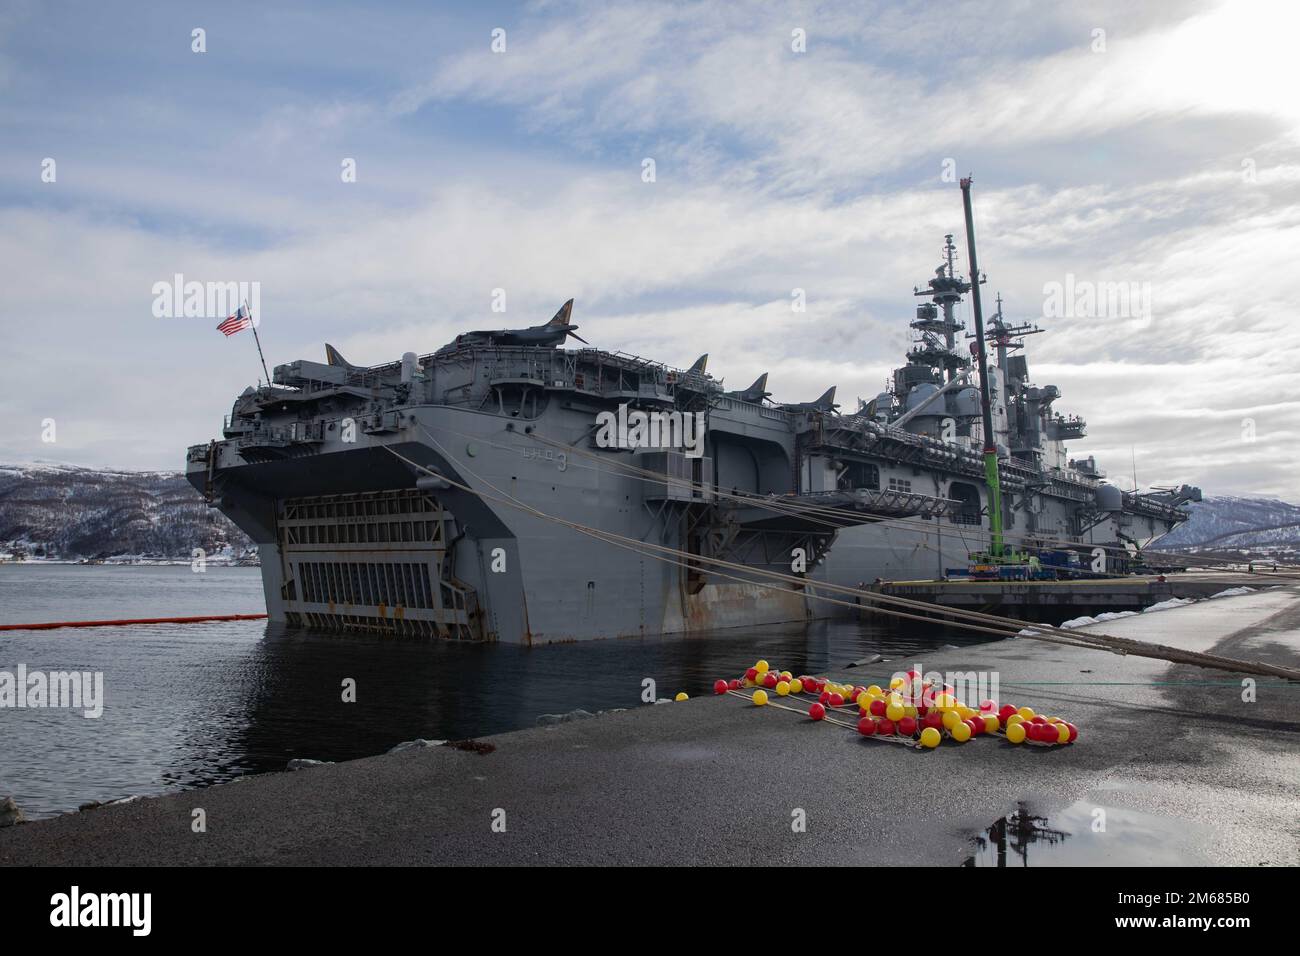 TROMSO, Norway (April 15, 2022) – The Wasp-class amphibious assault ship USS Kearsarge (LHD 3) moored in port in Tromso, Norway, during a scheduled port visit, April 15, 2022. Kearsarge, flagship of the Kearsarge ARG/MEU team, is on a scheduled deployment under the command and control of Task Force 61/2 while operating in U.S. Sixth Fleet in support of U.S., Allied and partner interests in Europe and Africa. Stock Photo